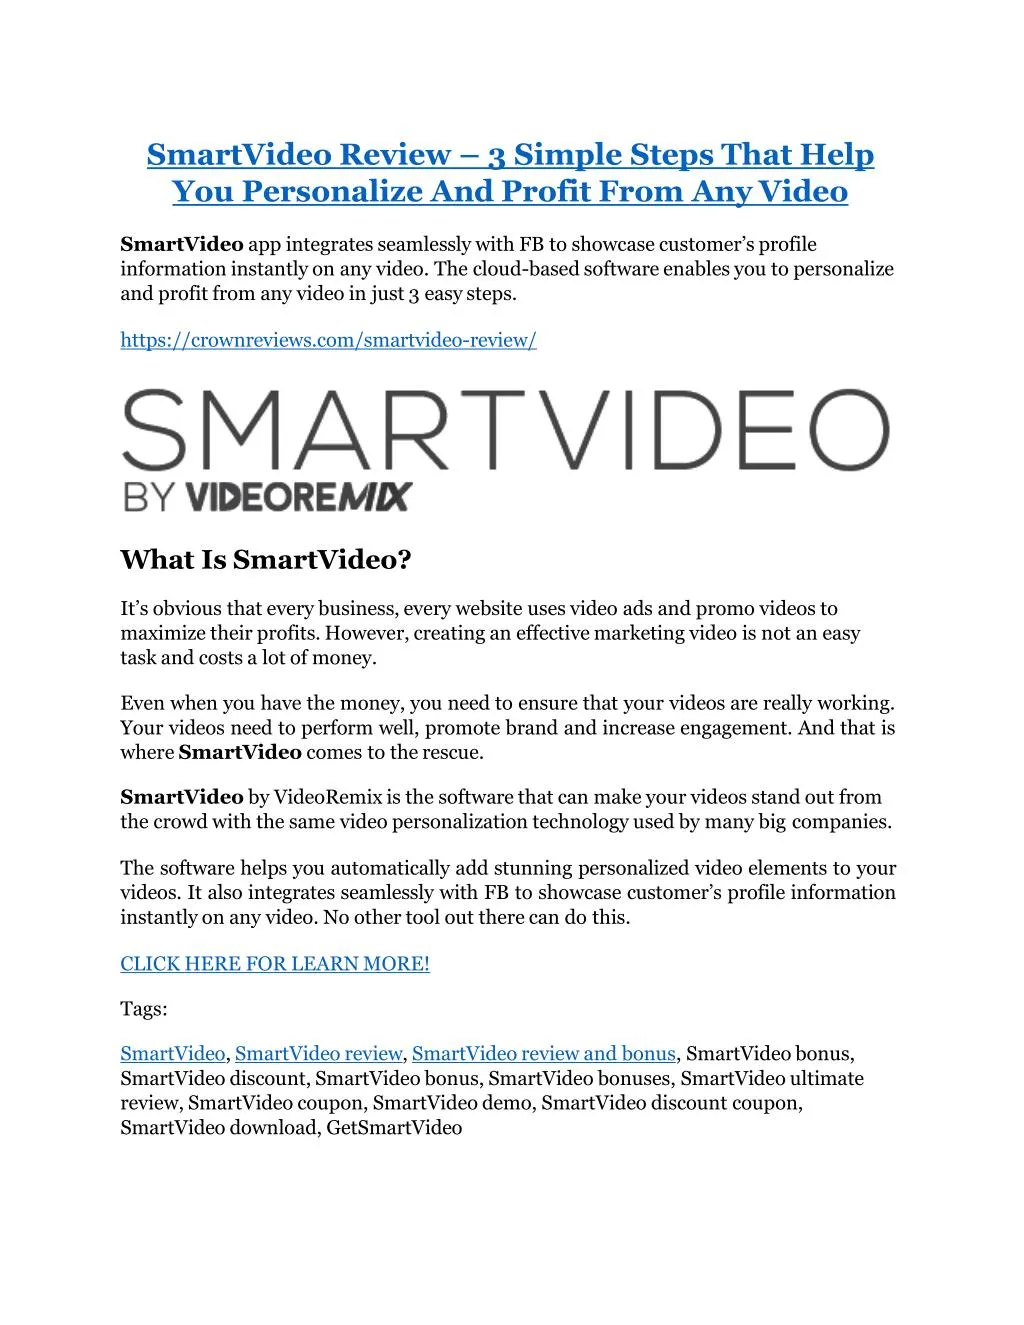 smartvideo review 3 simple steps that help